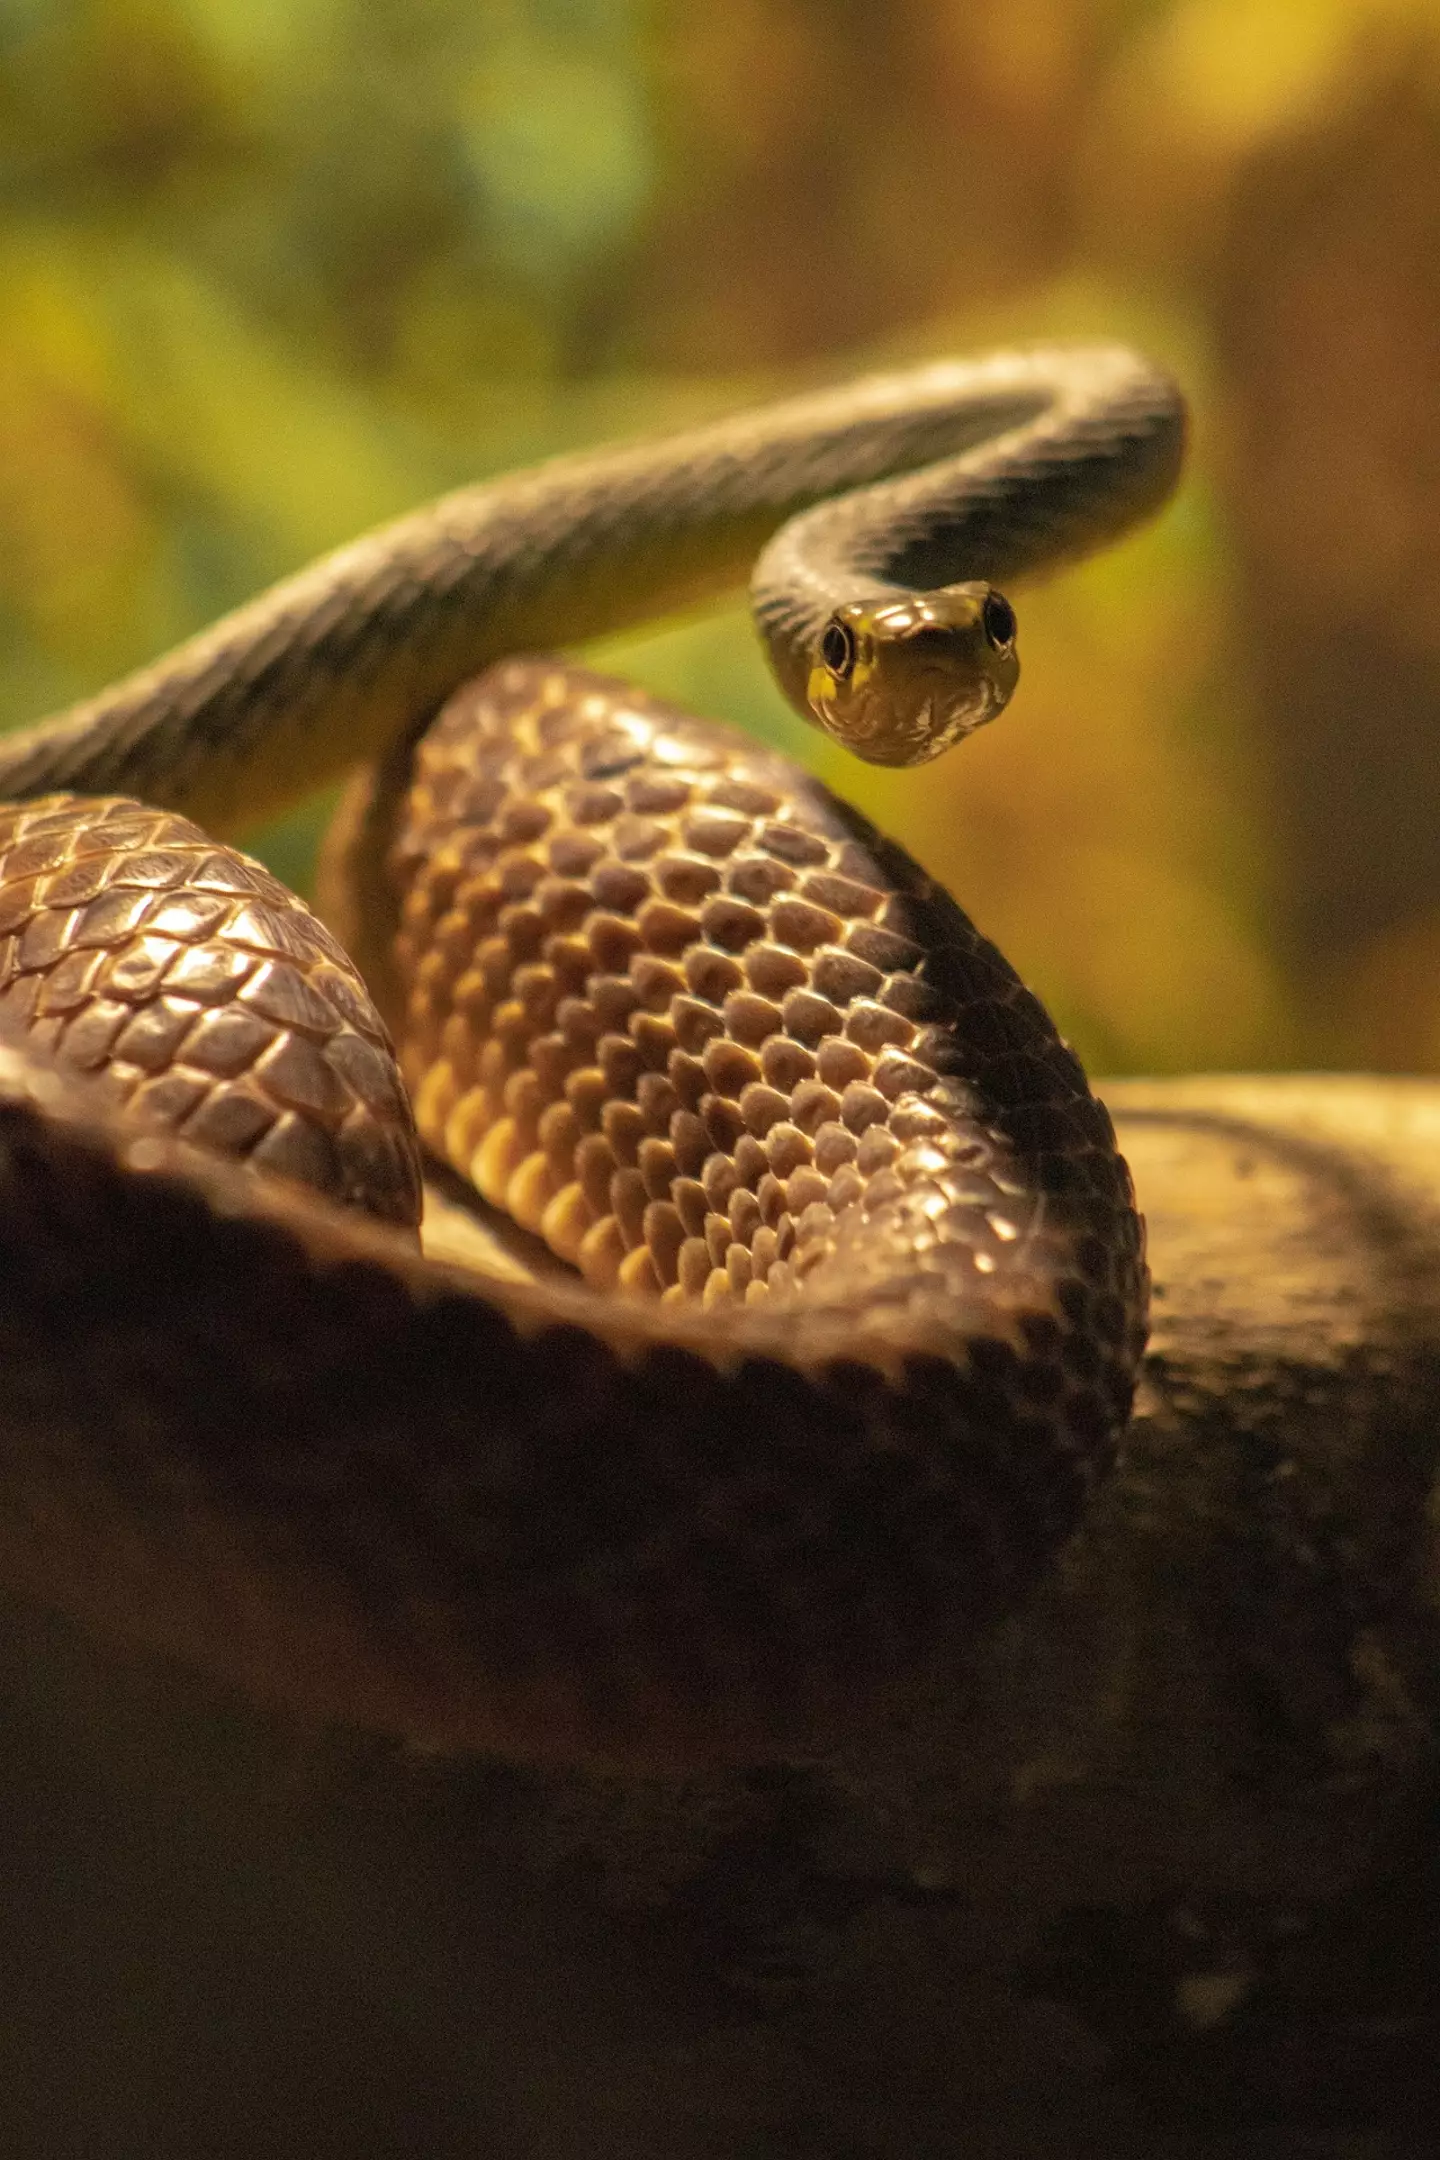 The Common Tree Snake is agile and slender. They can grow up to 2metres in length.